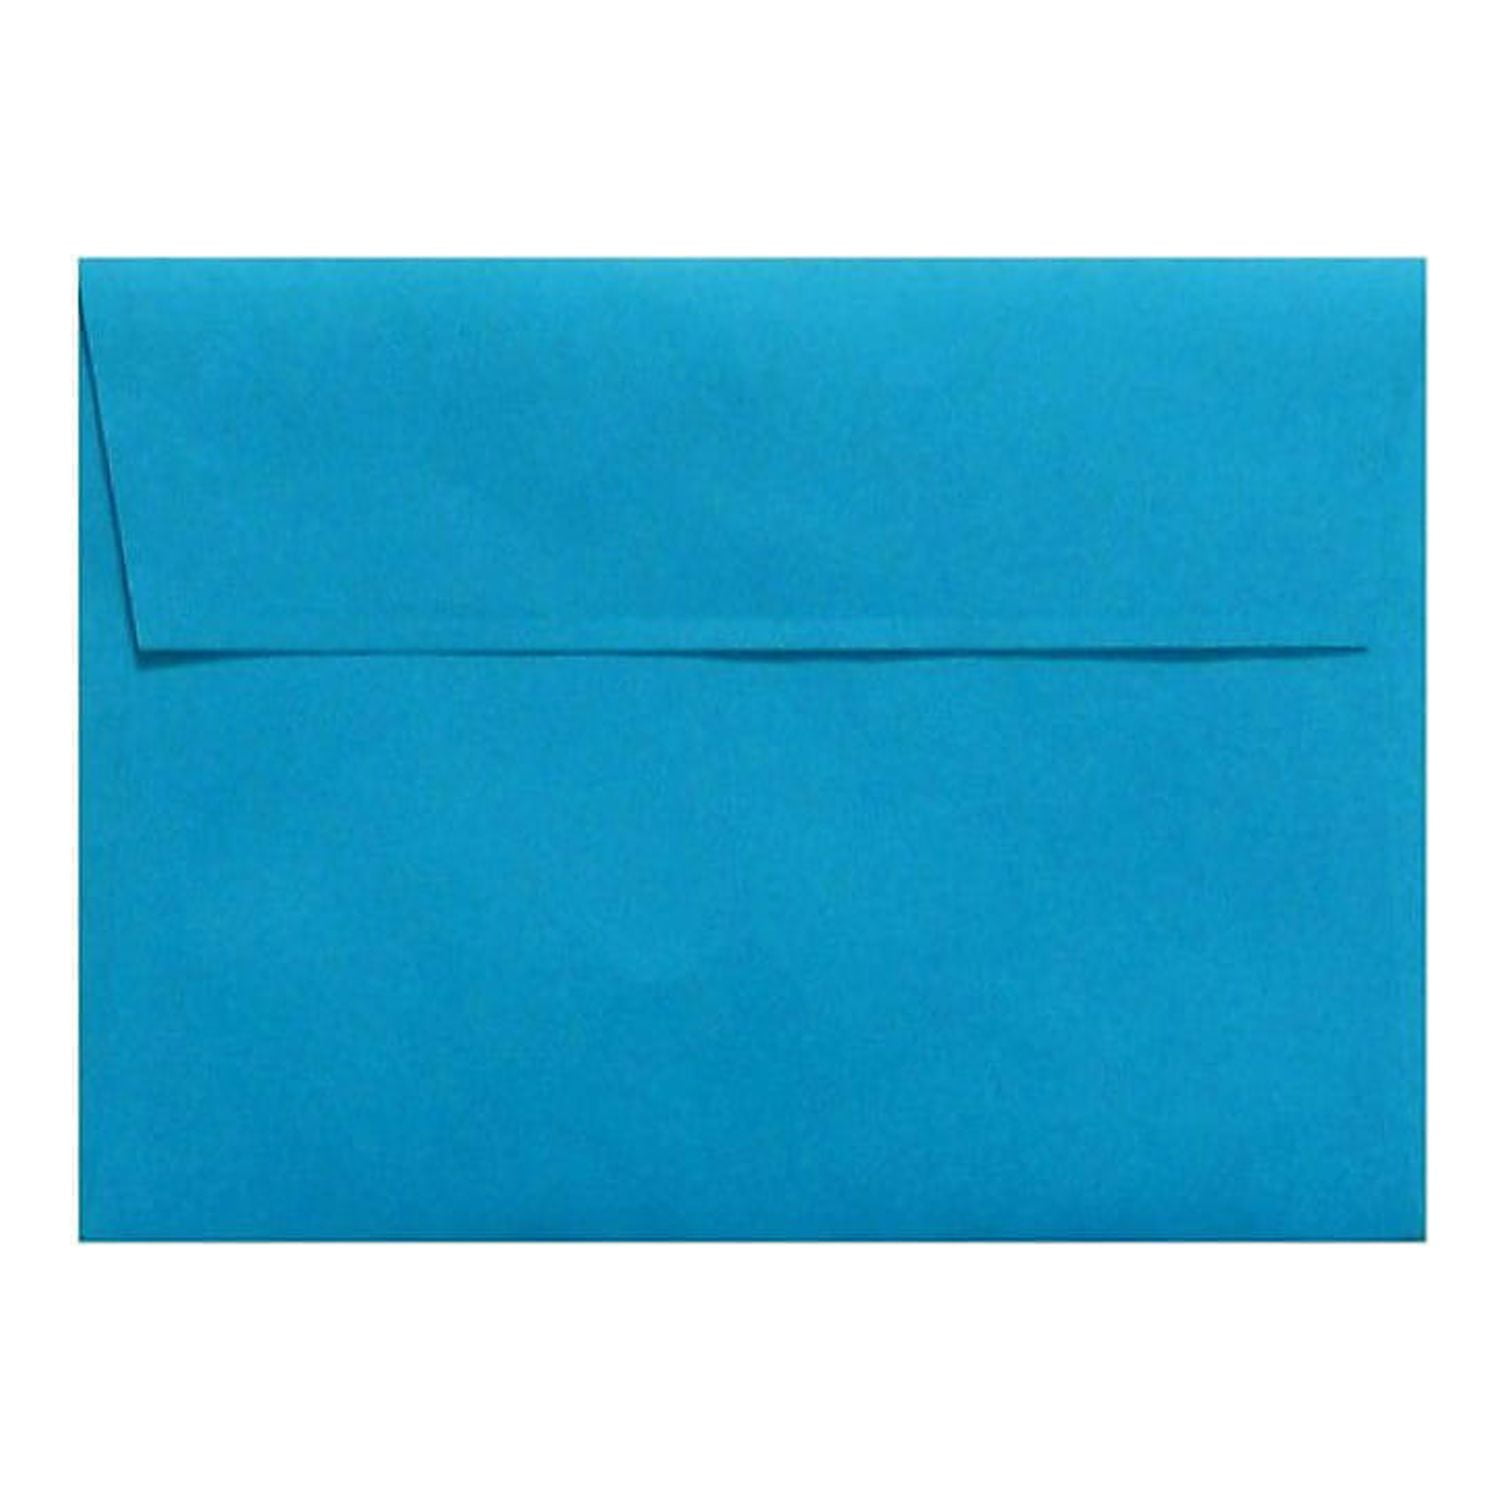 Invitation Envelopes, 120-Pack 4x6 Envelopes for Invitations, Pastel Colored Envelopes, A4, 4 1/4 x 6 1/4 Inches, 6 Colors